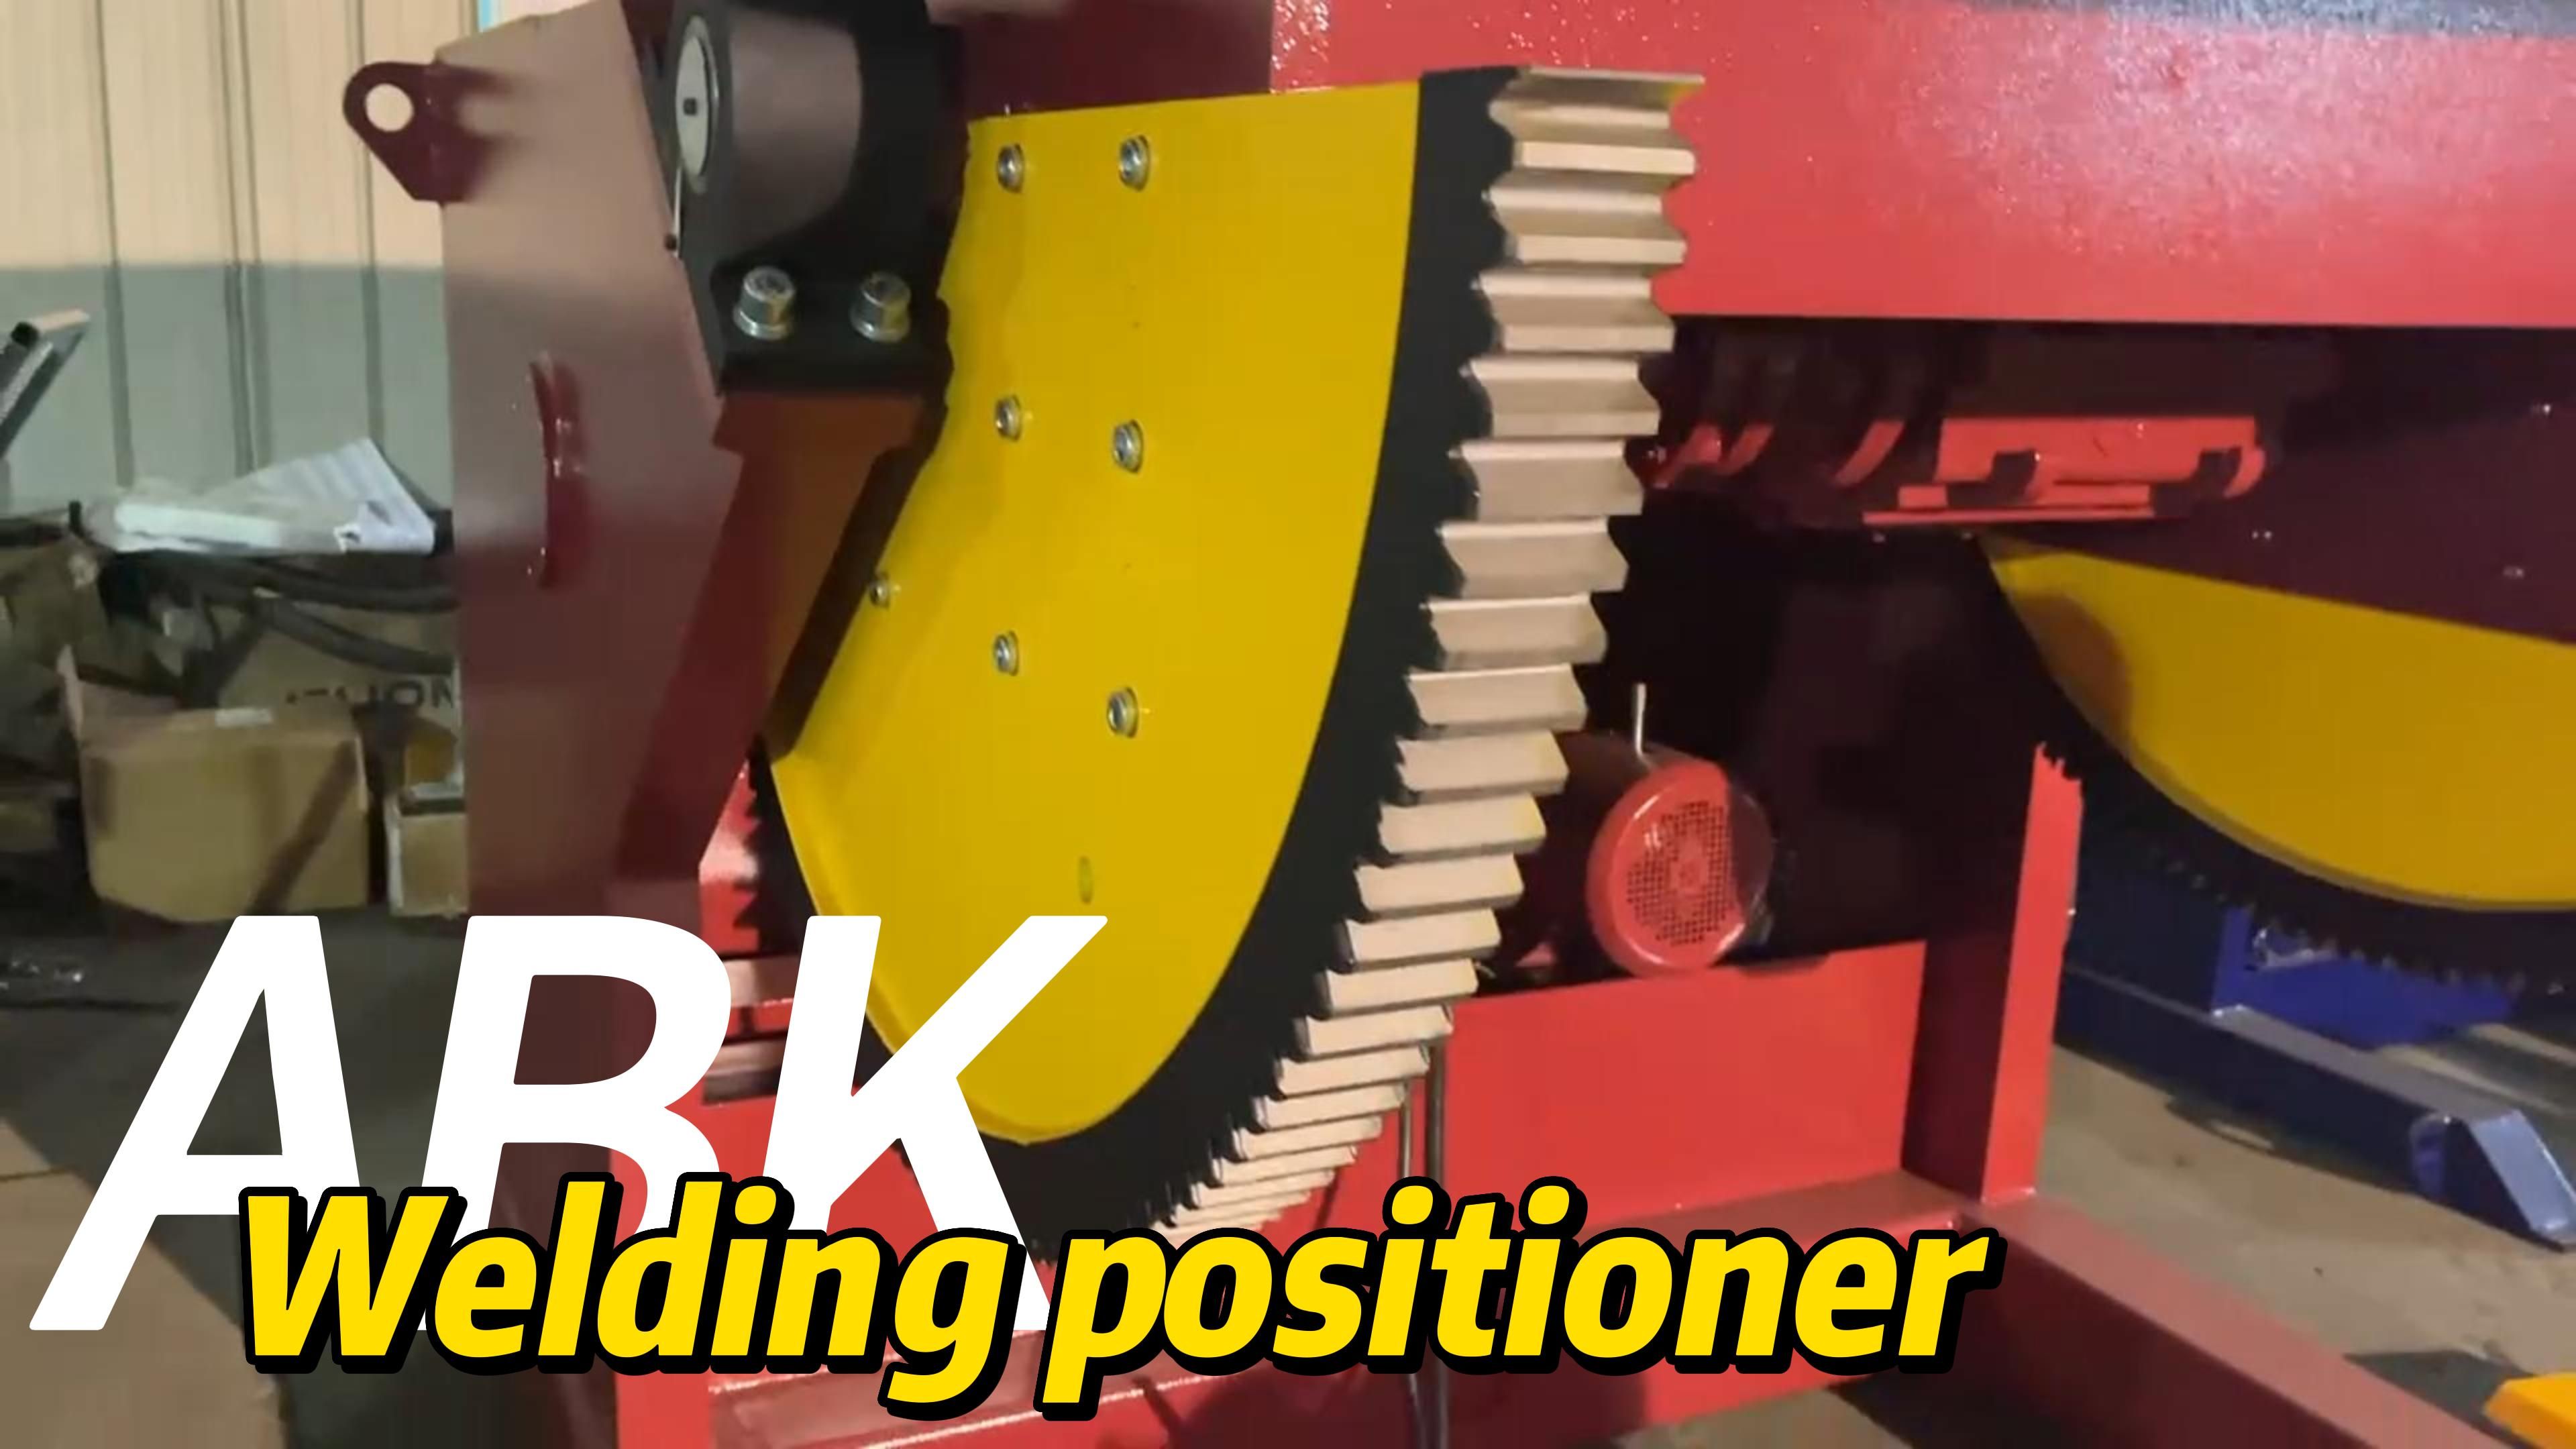 Welding positioner: an industrial weapon for accurate positioning welding, which can effectively solve welding problems.